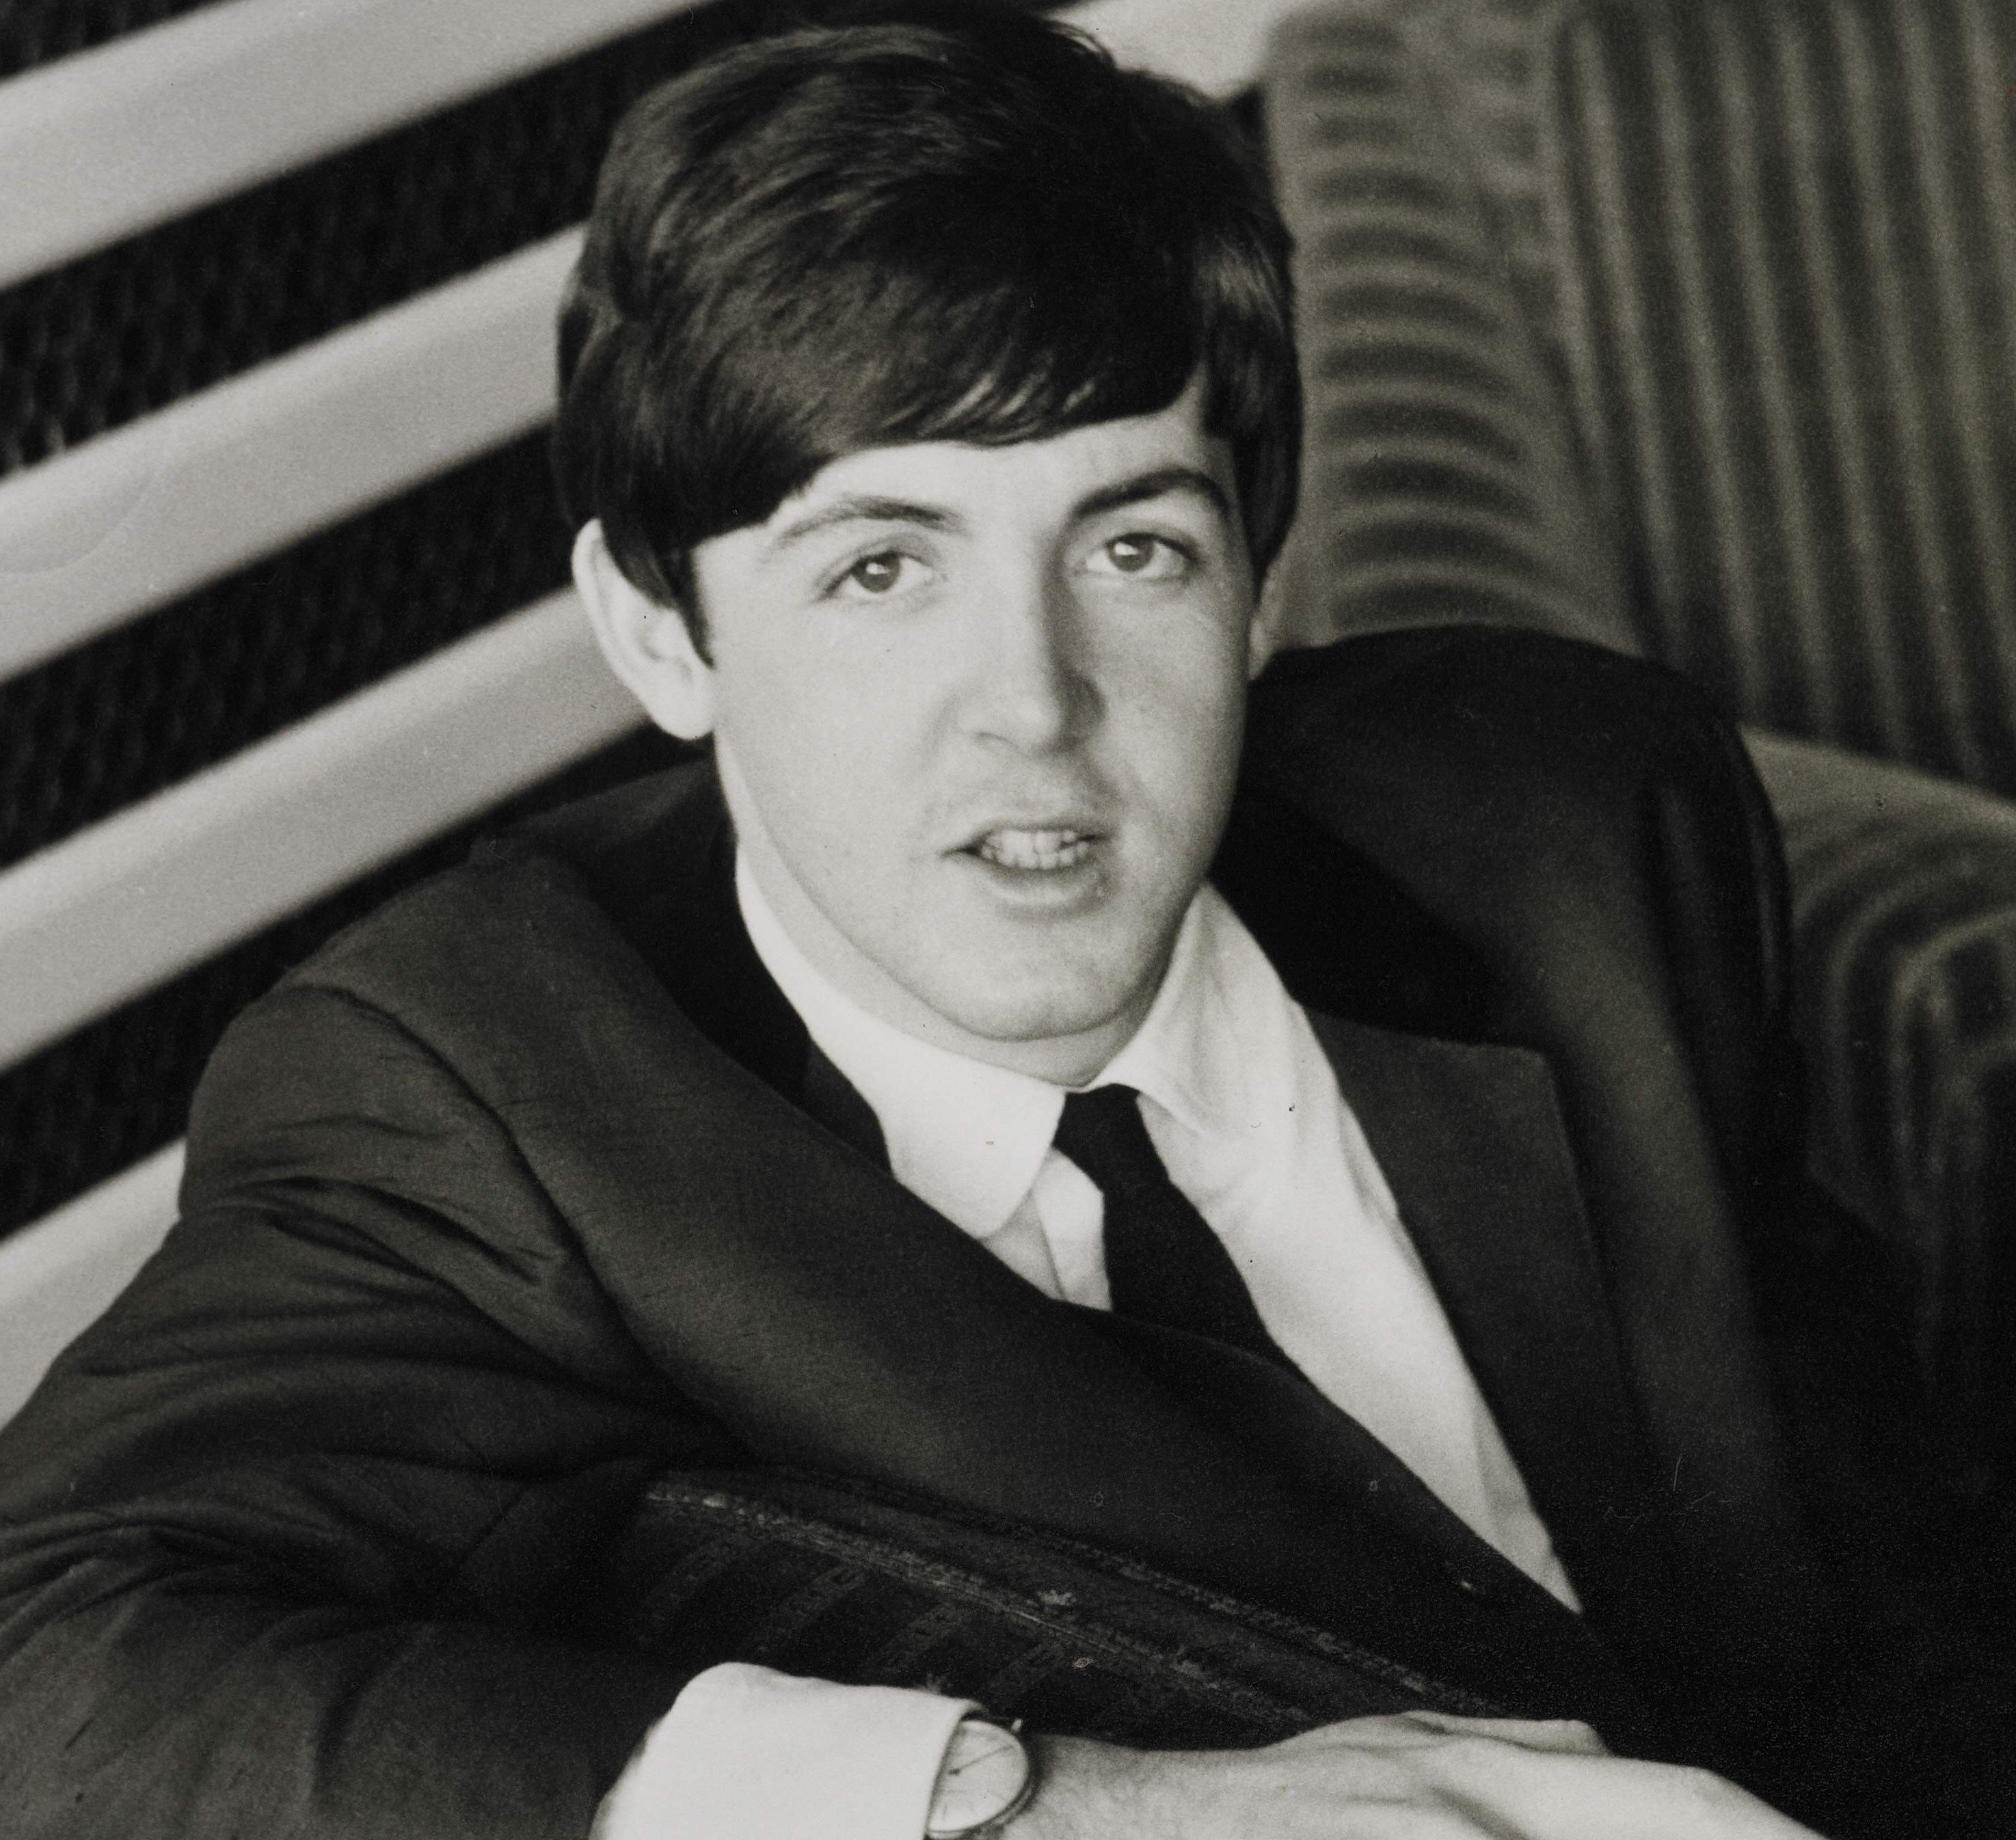 Paul McCartney in a suit during The Beatles' "Can't Buy Me Love" era